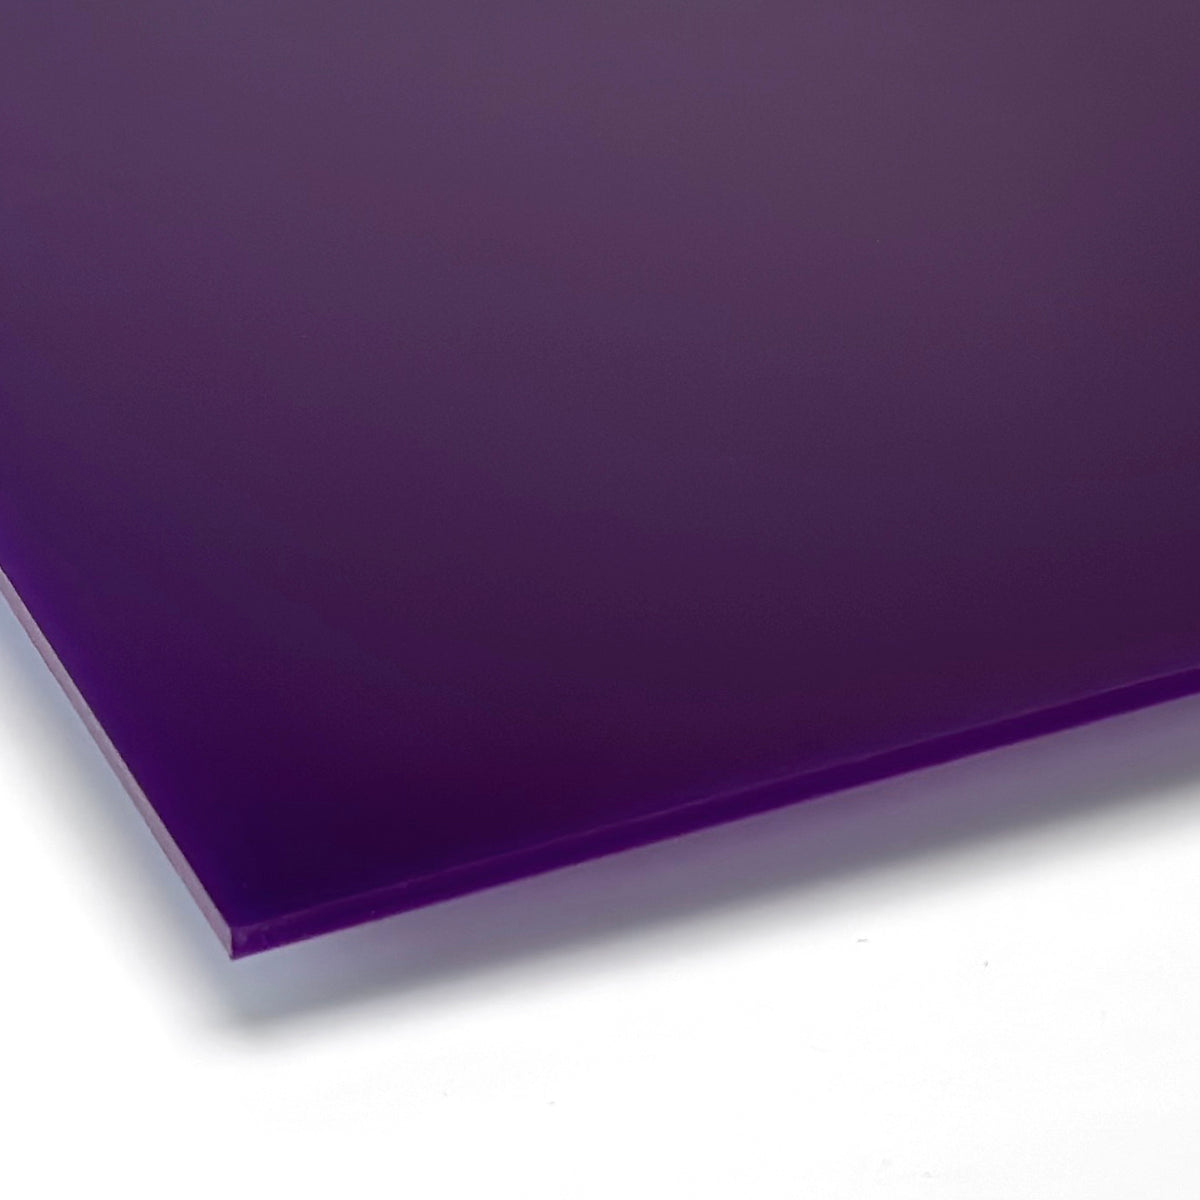 Purple Acrylic with laser cutting only - 600x400mm